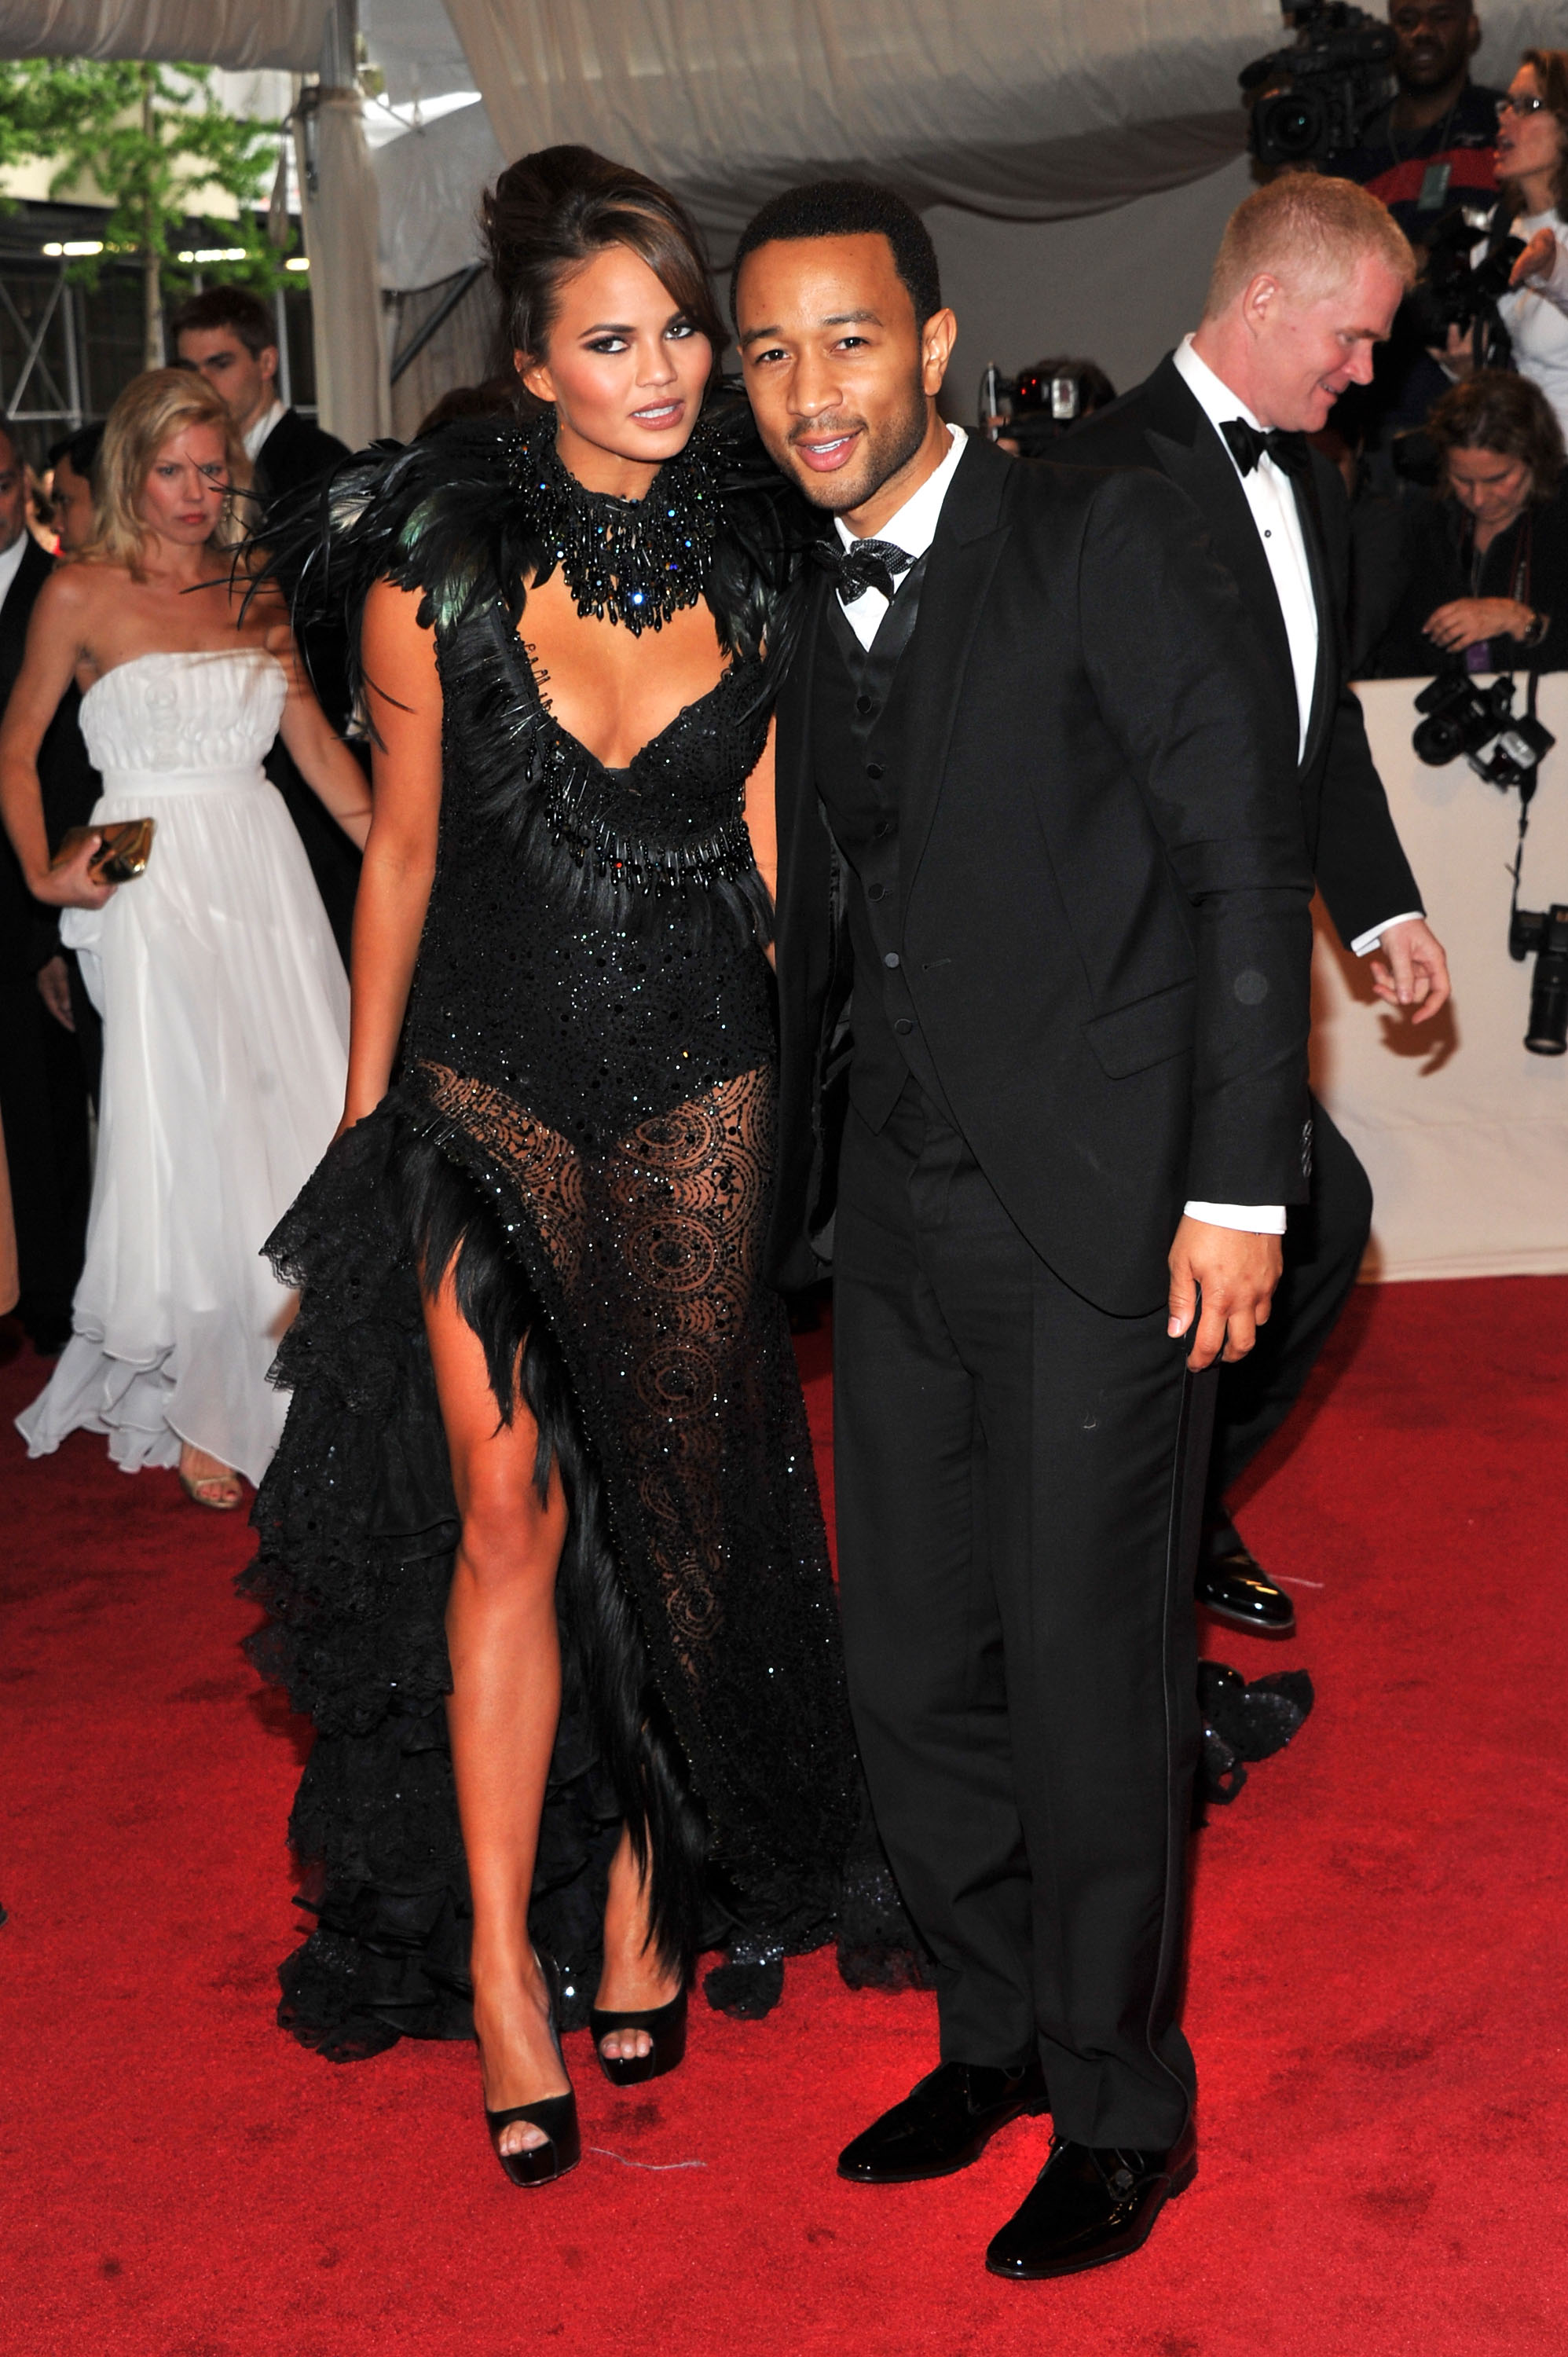 Chrissy Teigen and John Legend during the "Alexander McQueen: Savage Beauty" Costume Institute Gala at The Metropolitan Museum of Art on May 2, 2011, in New York City. | Source: Getty Images